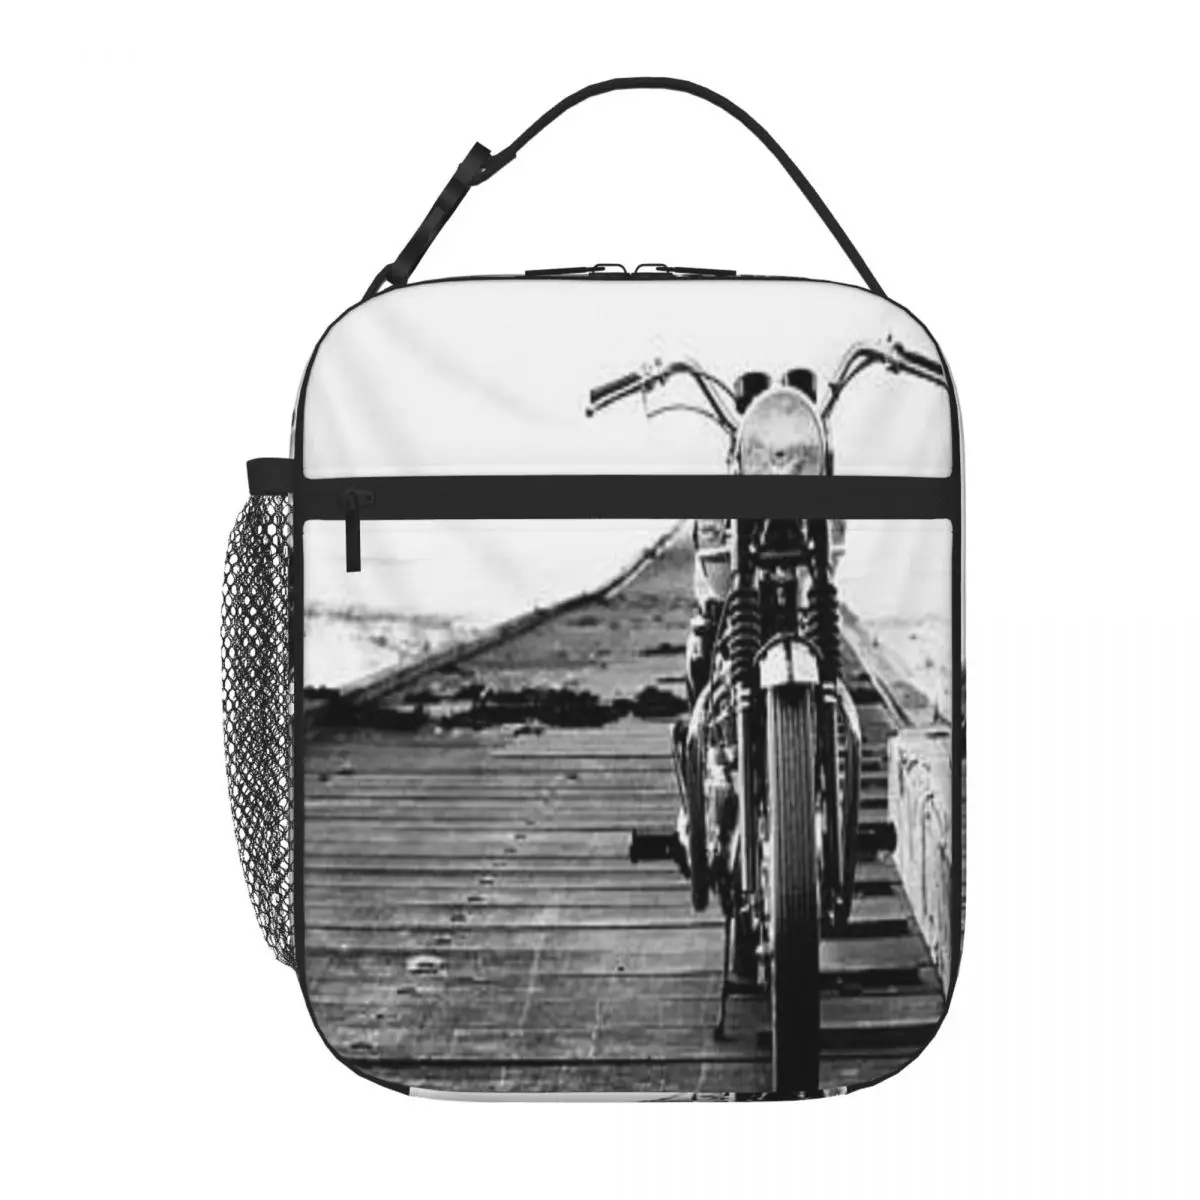 The Solo Motorcycle Mark Rogan Lunch Tote Lunch Bags Thermal Bags Thermal Bag Female